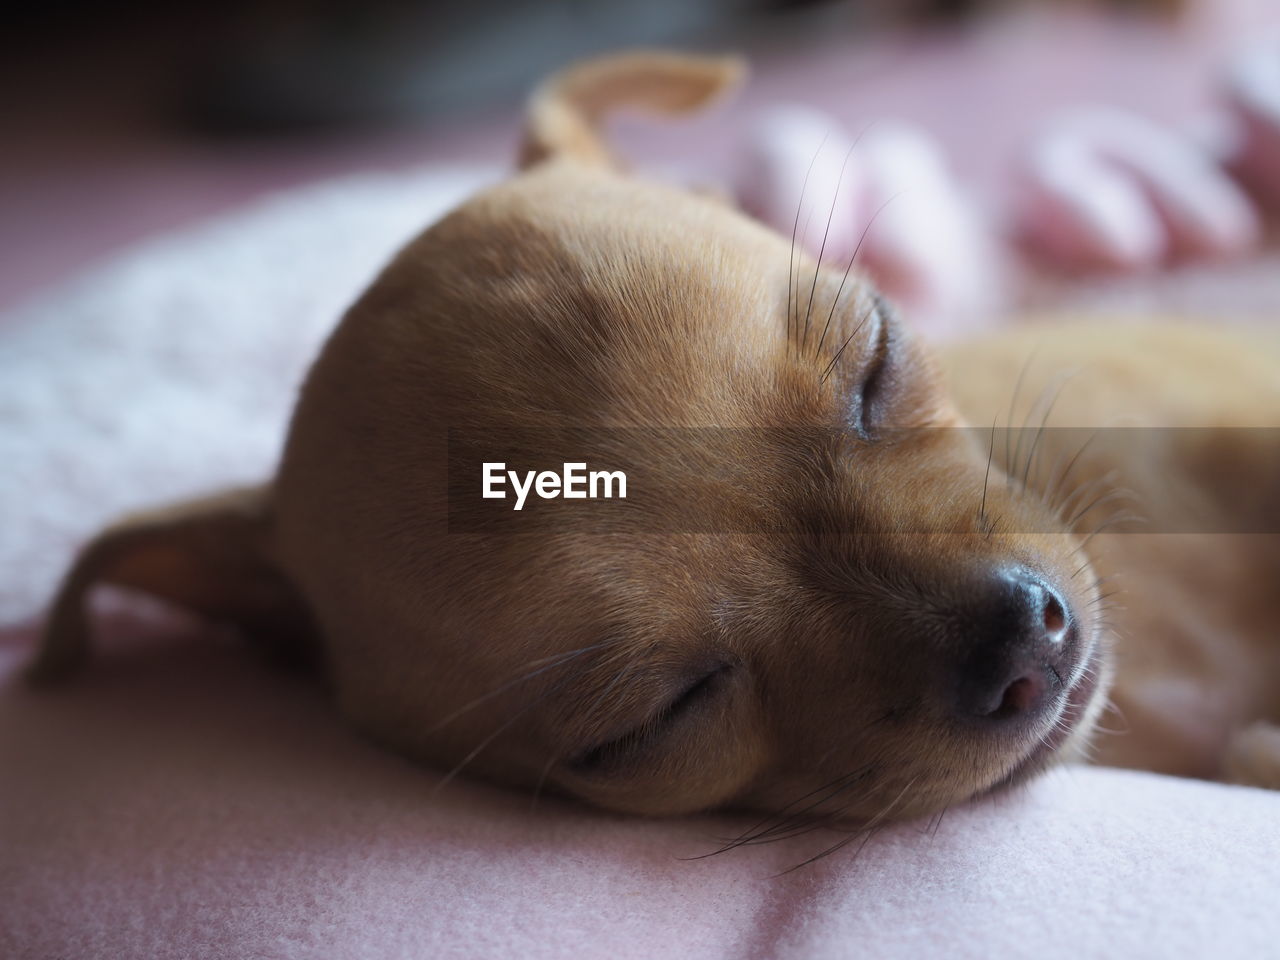 CLOSE-UP OF DOG SLEEPING ON BED